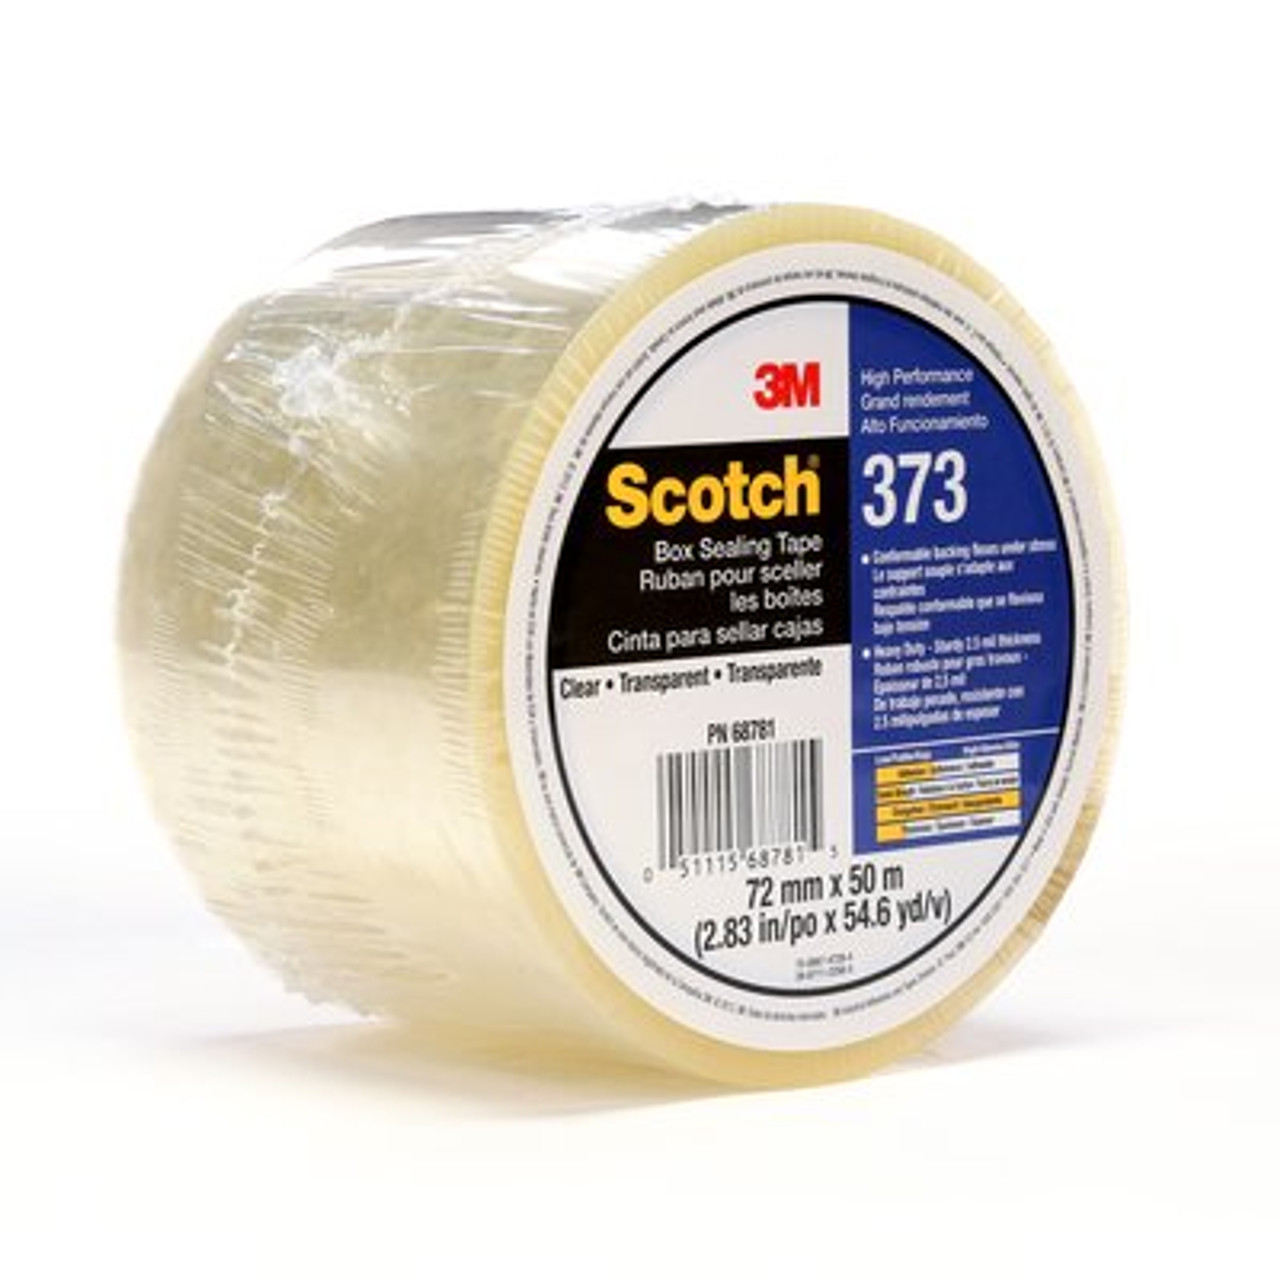 Scotch® High Performance Box Sealing Tape 373 Clear, (3") 72mm x 50m, 24 Individually Wrapped Rolls Per Case, Conveniently Packaged